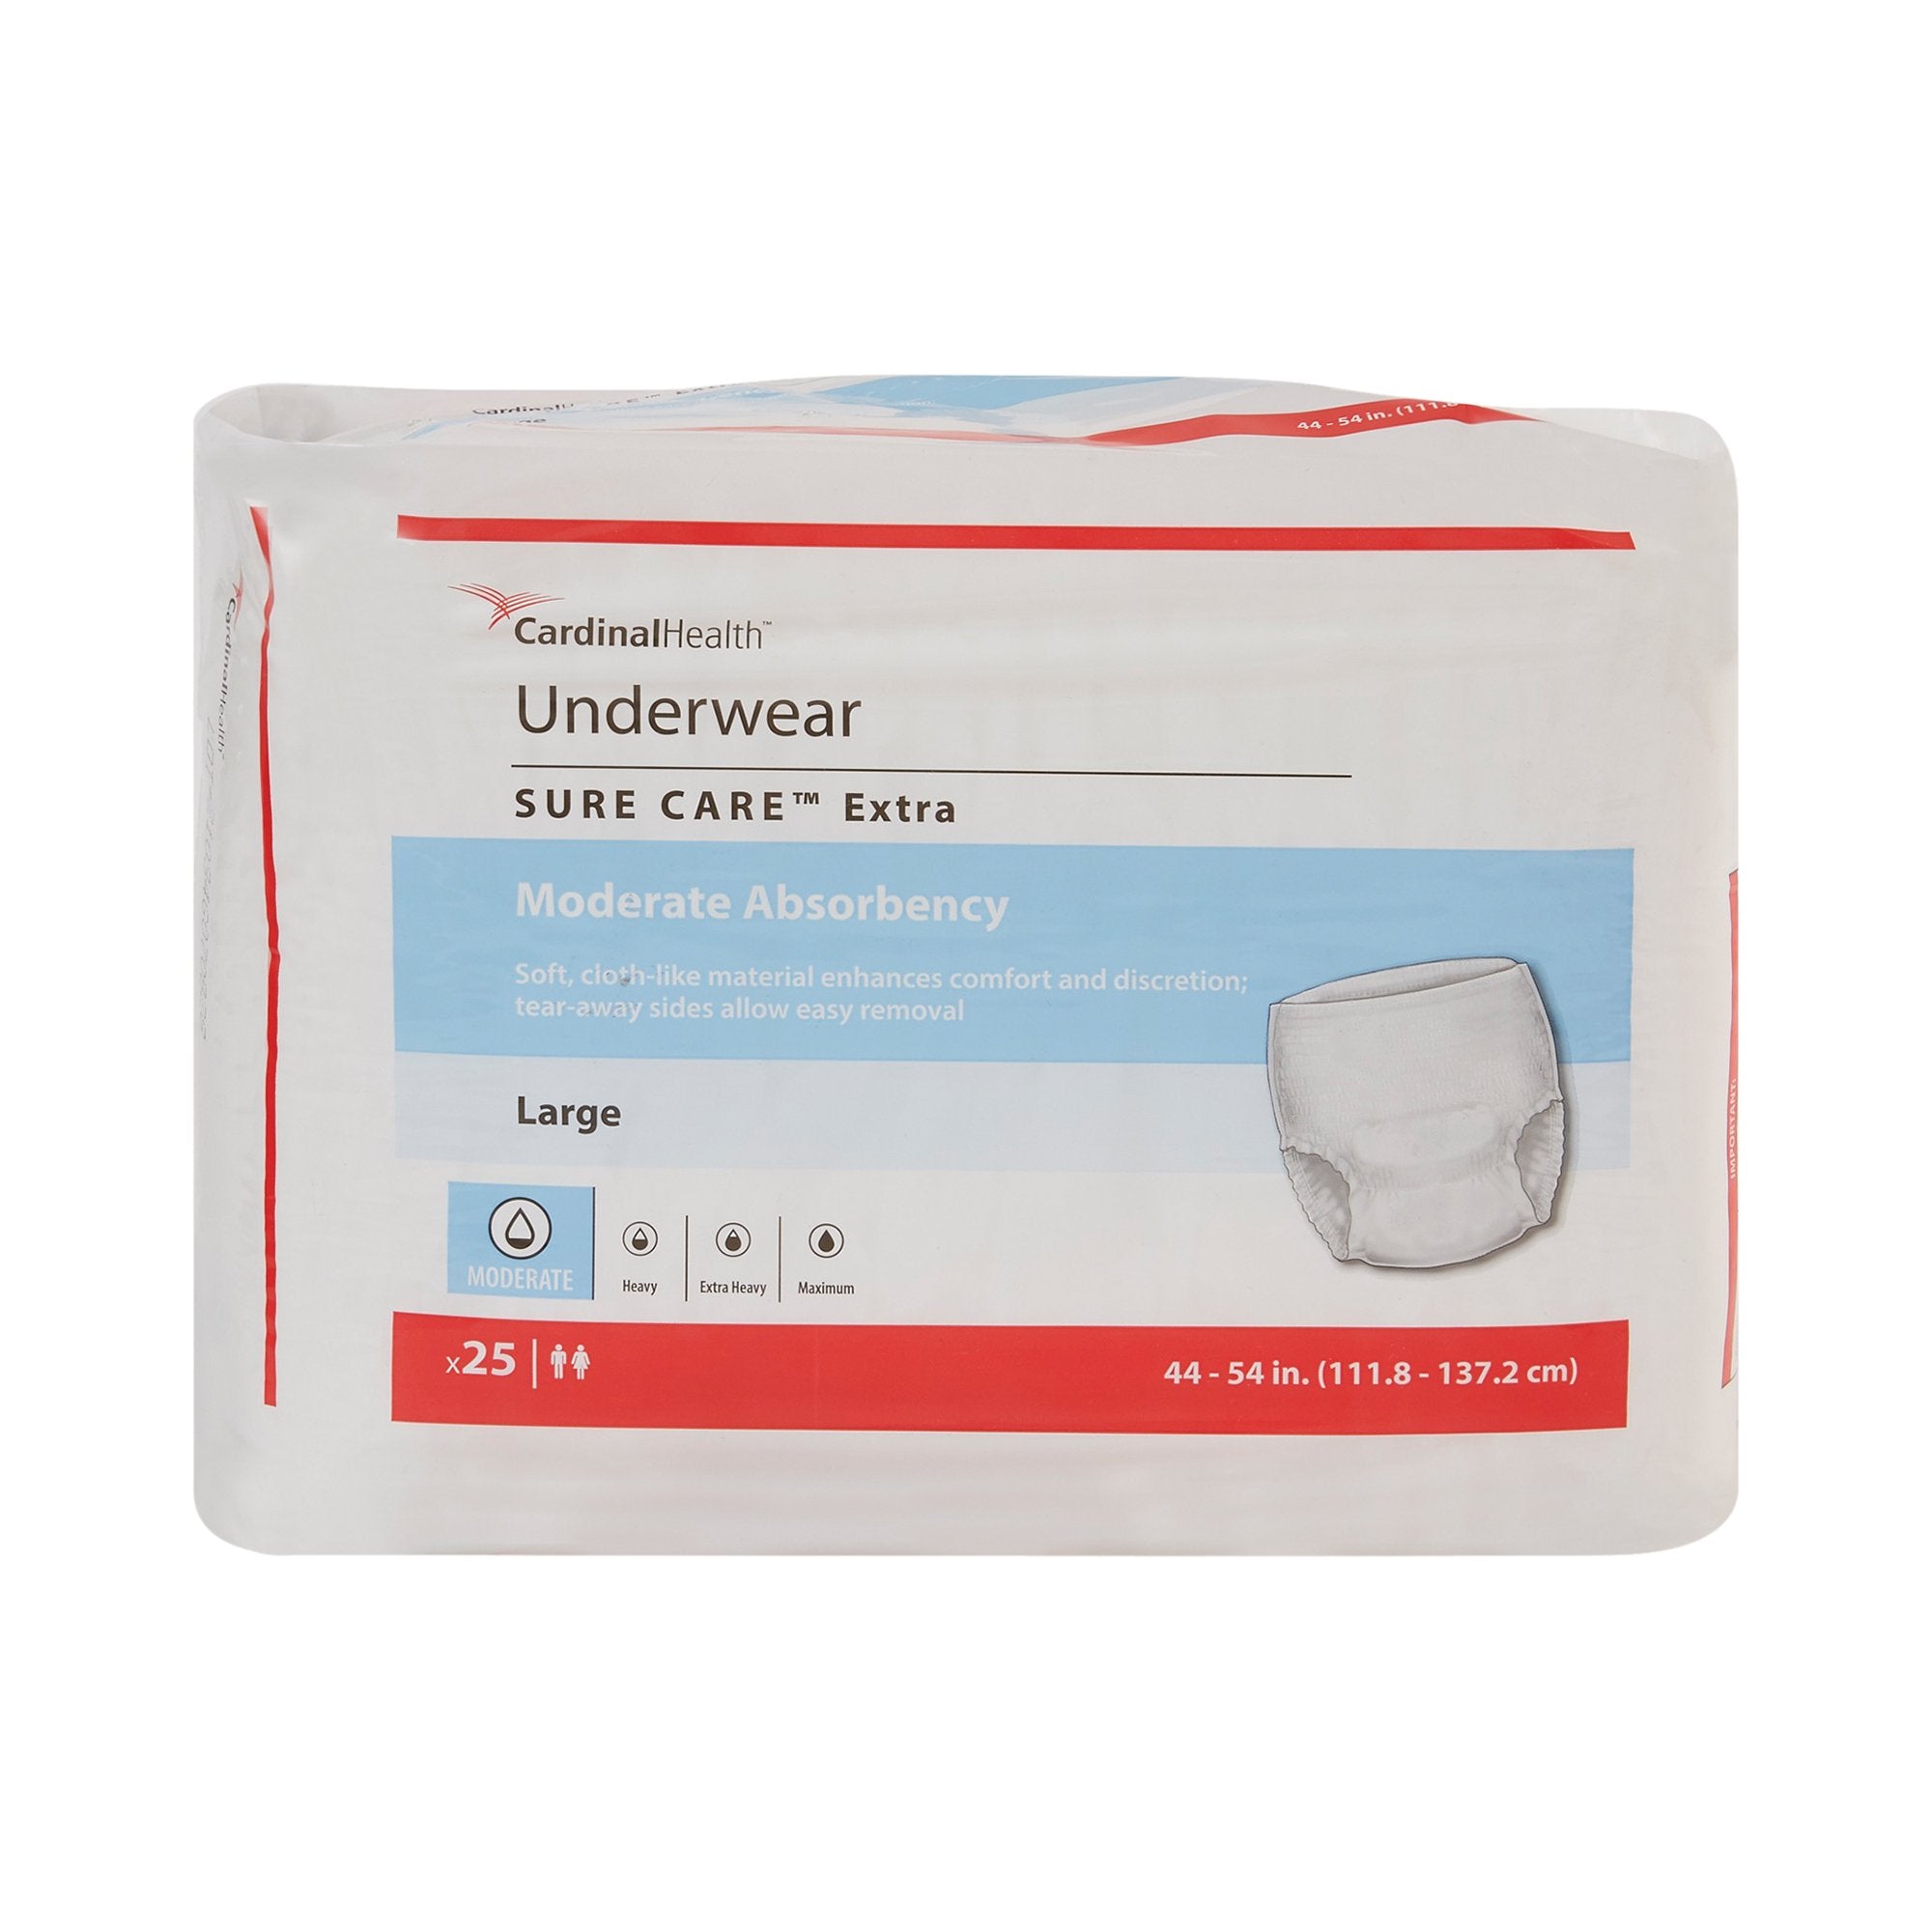 Unisex Adult Absorbent Underwear Simplicity Extra Pull On with Tear Away Seams Large Disposable Moderate Absorbency